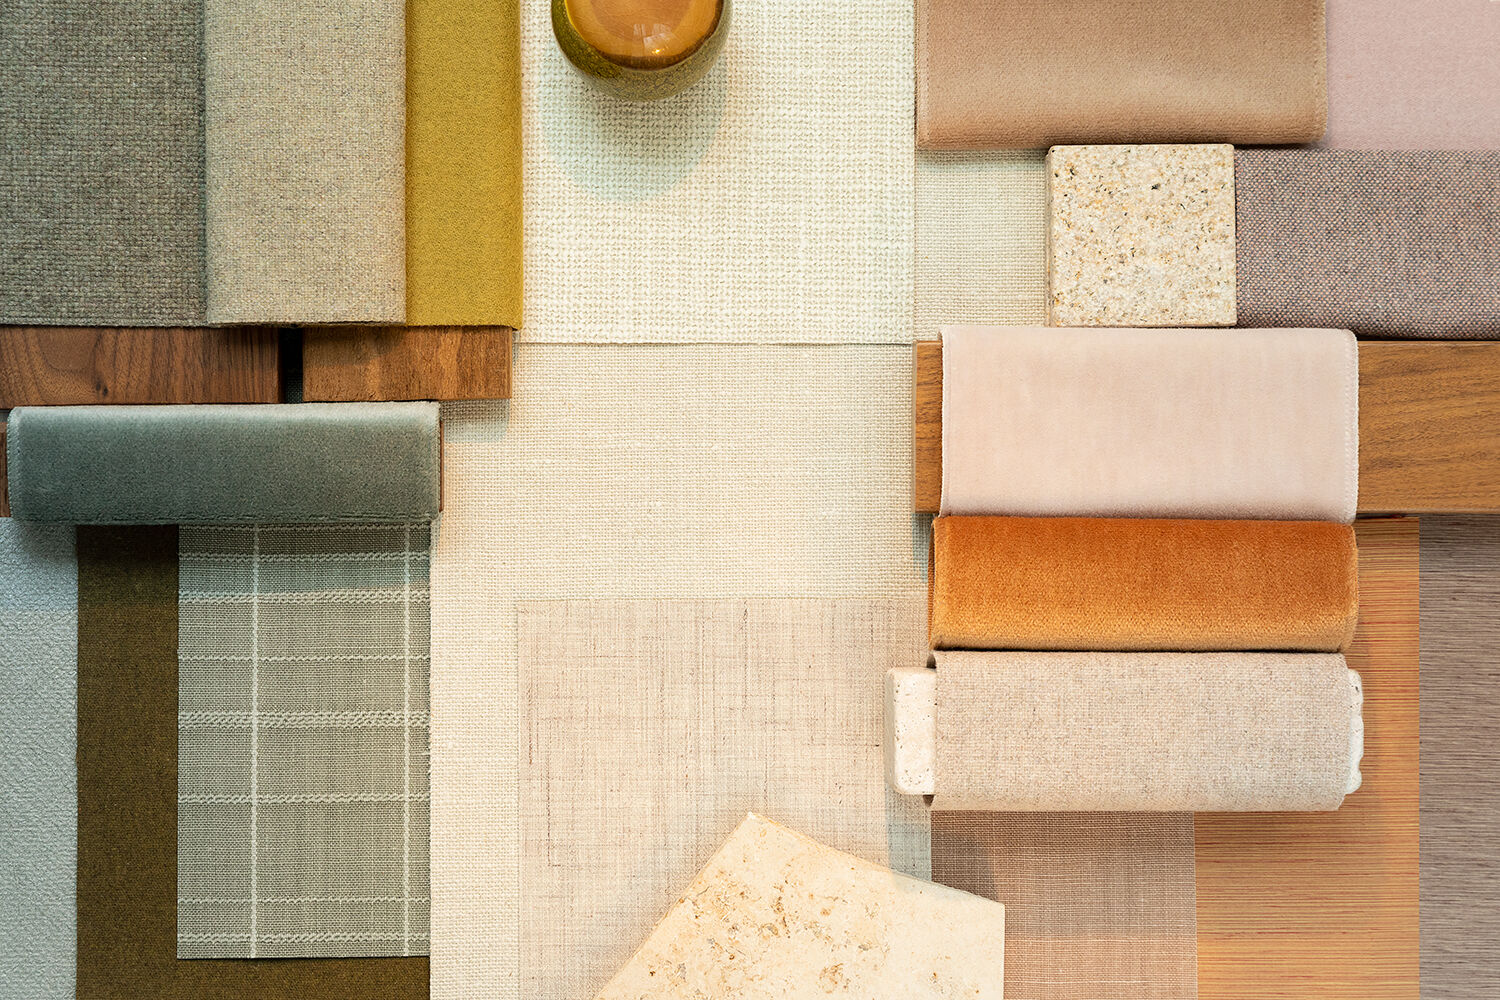 materials for an all-natural interior